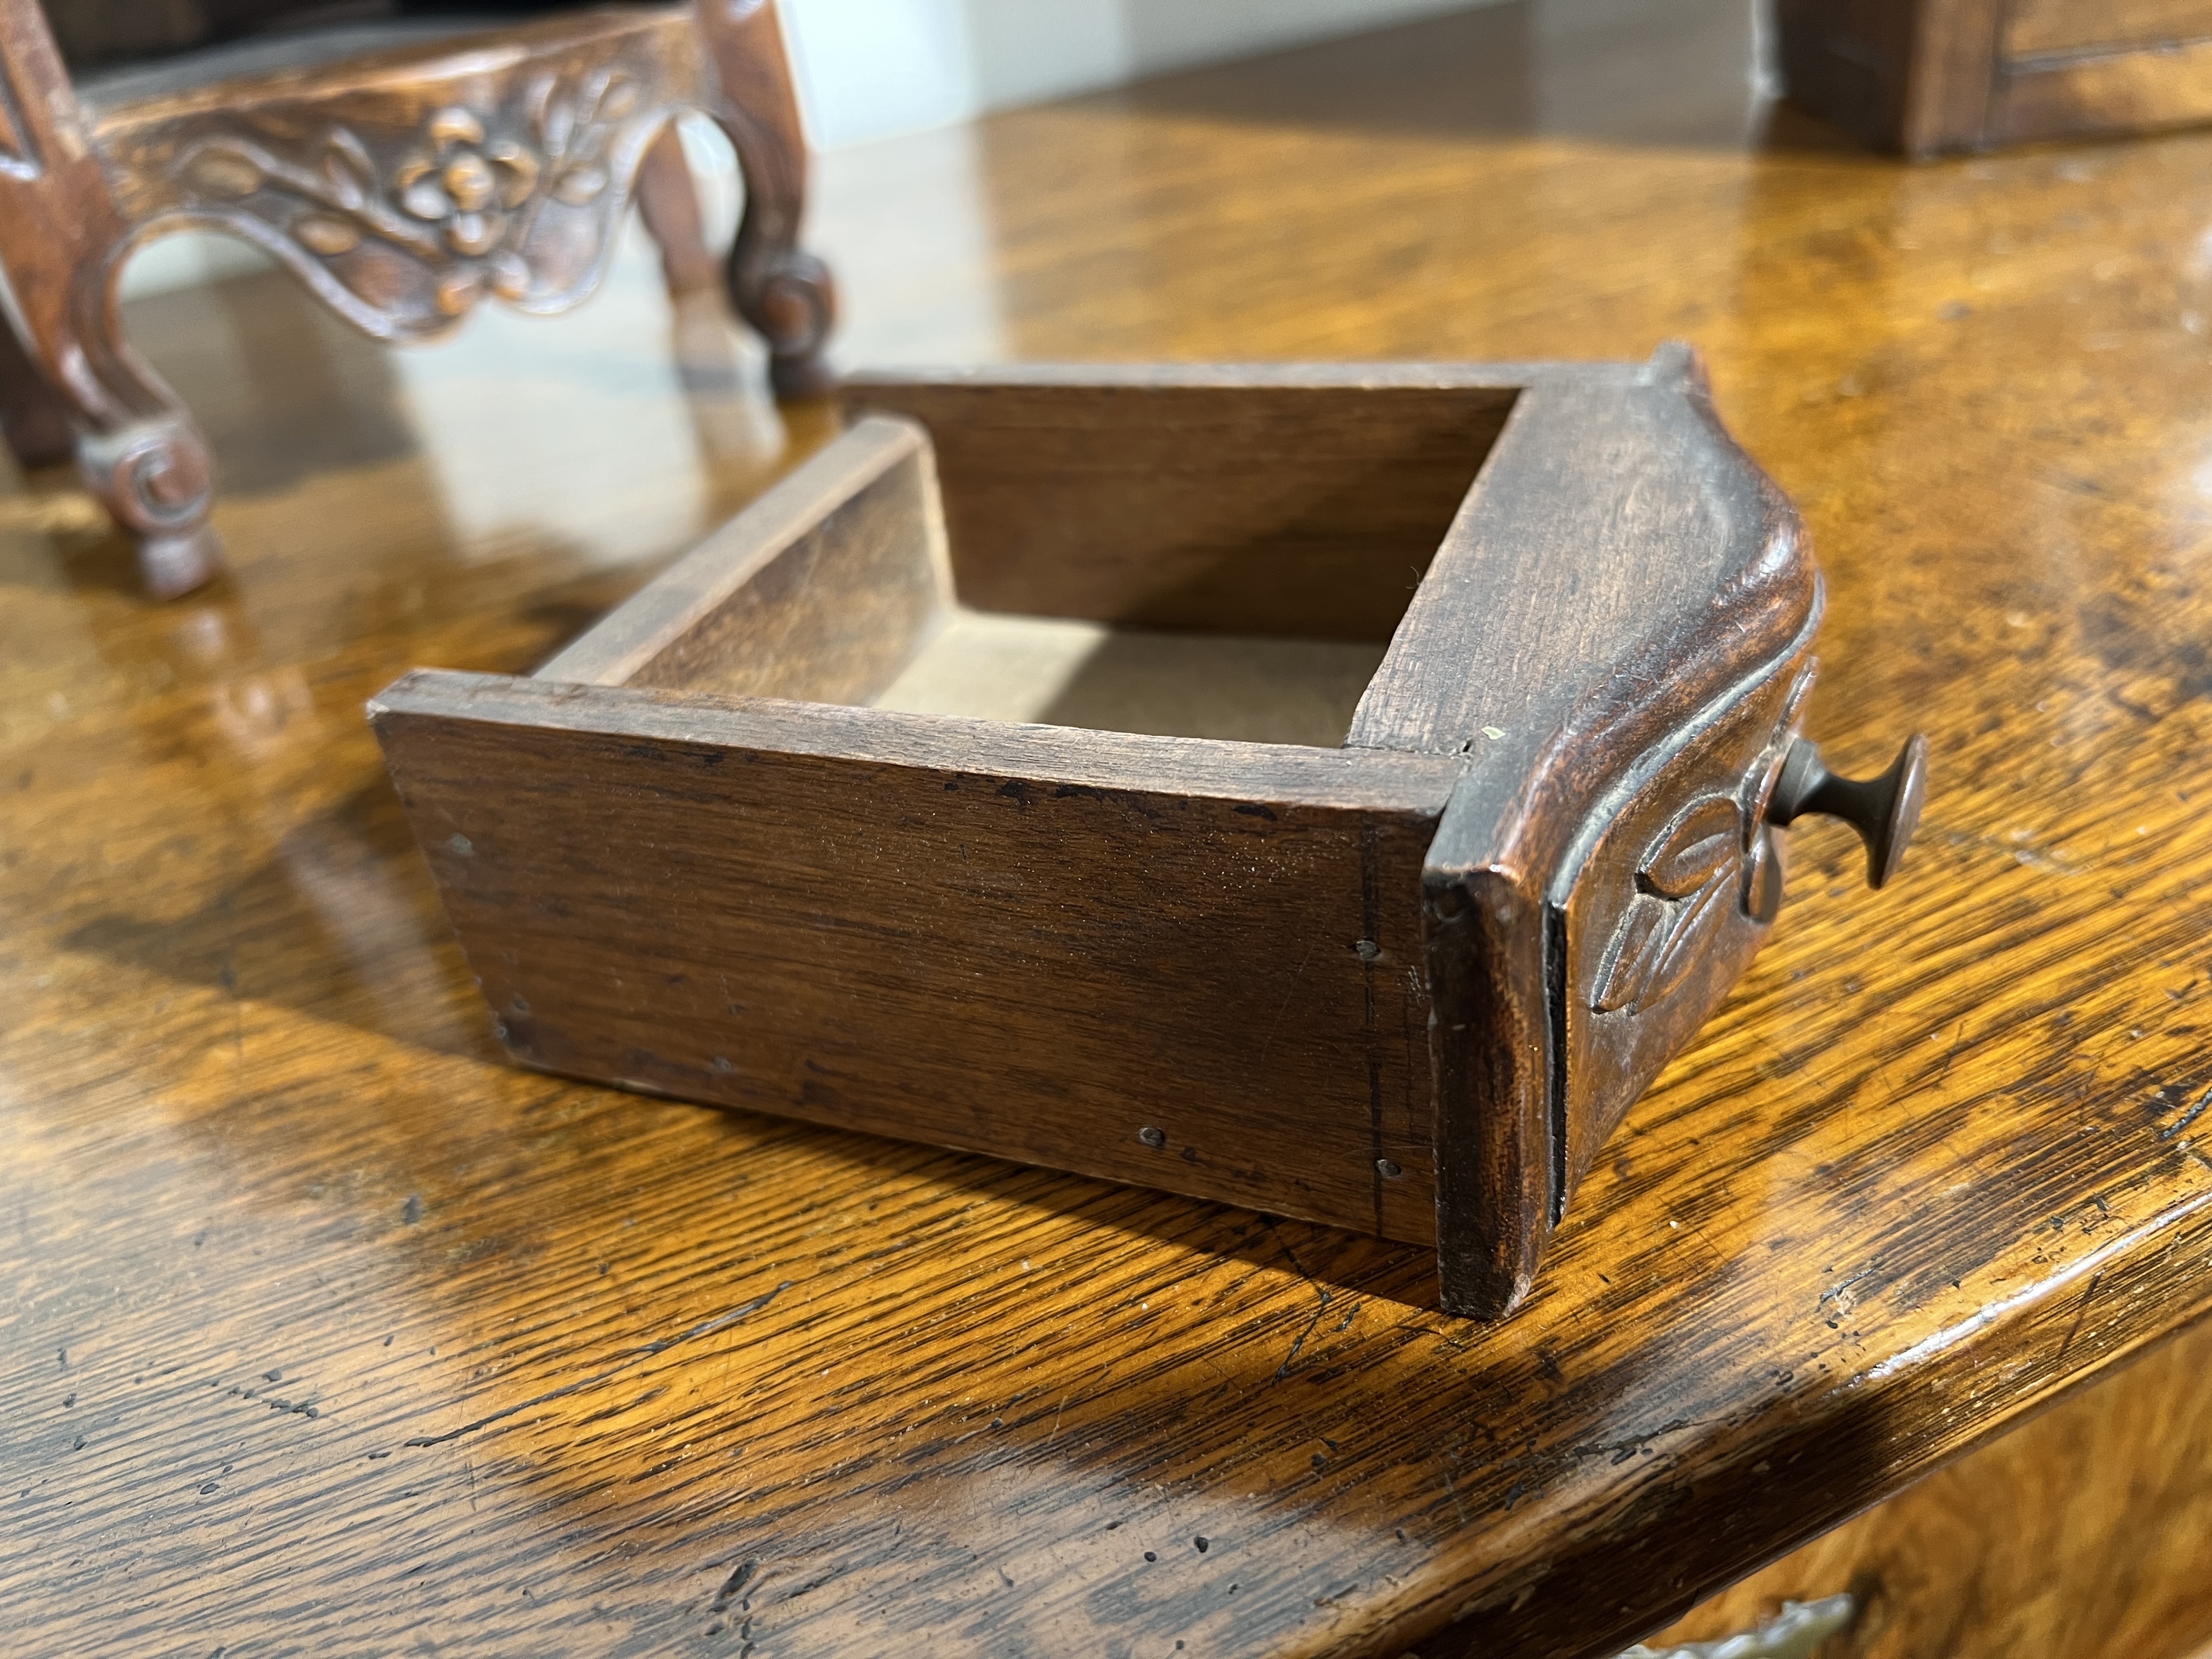 A FRENCH PROVINCIAL WALNUT CANDLE BOX LATE 18TH / EARLY 19TH CENTURYwith a sliding cover and - Image 9 of 18